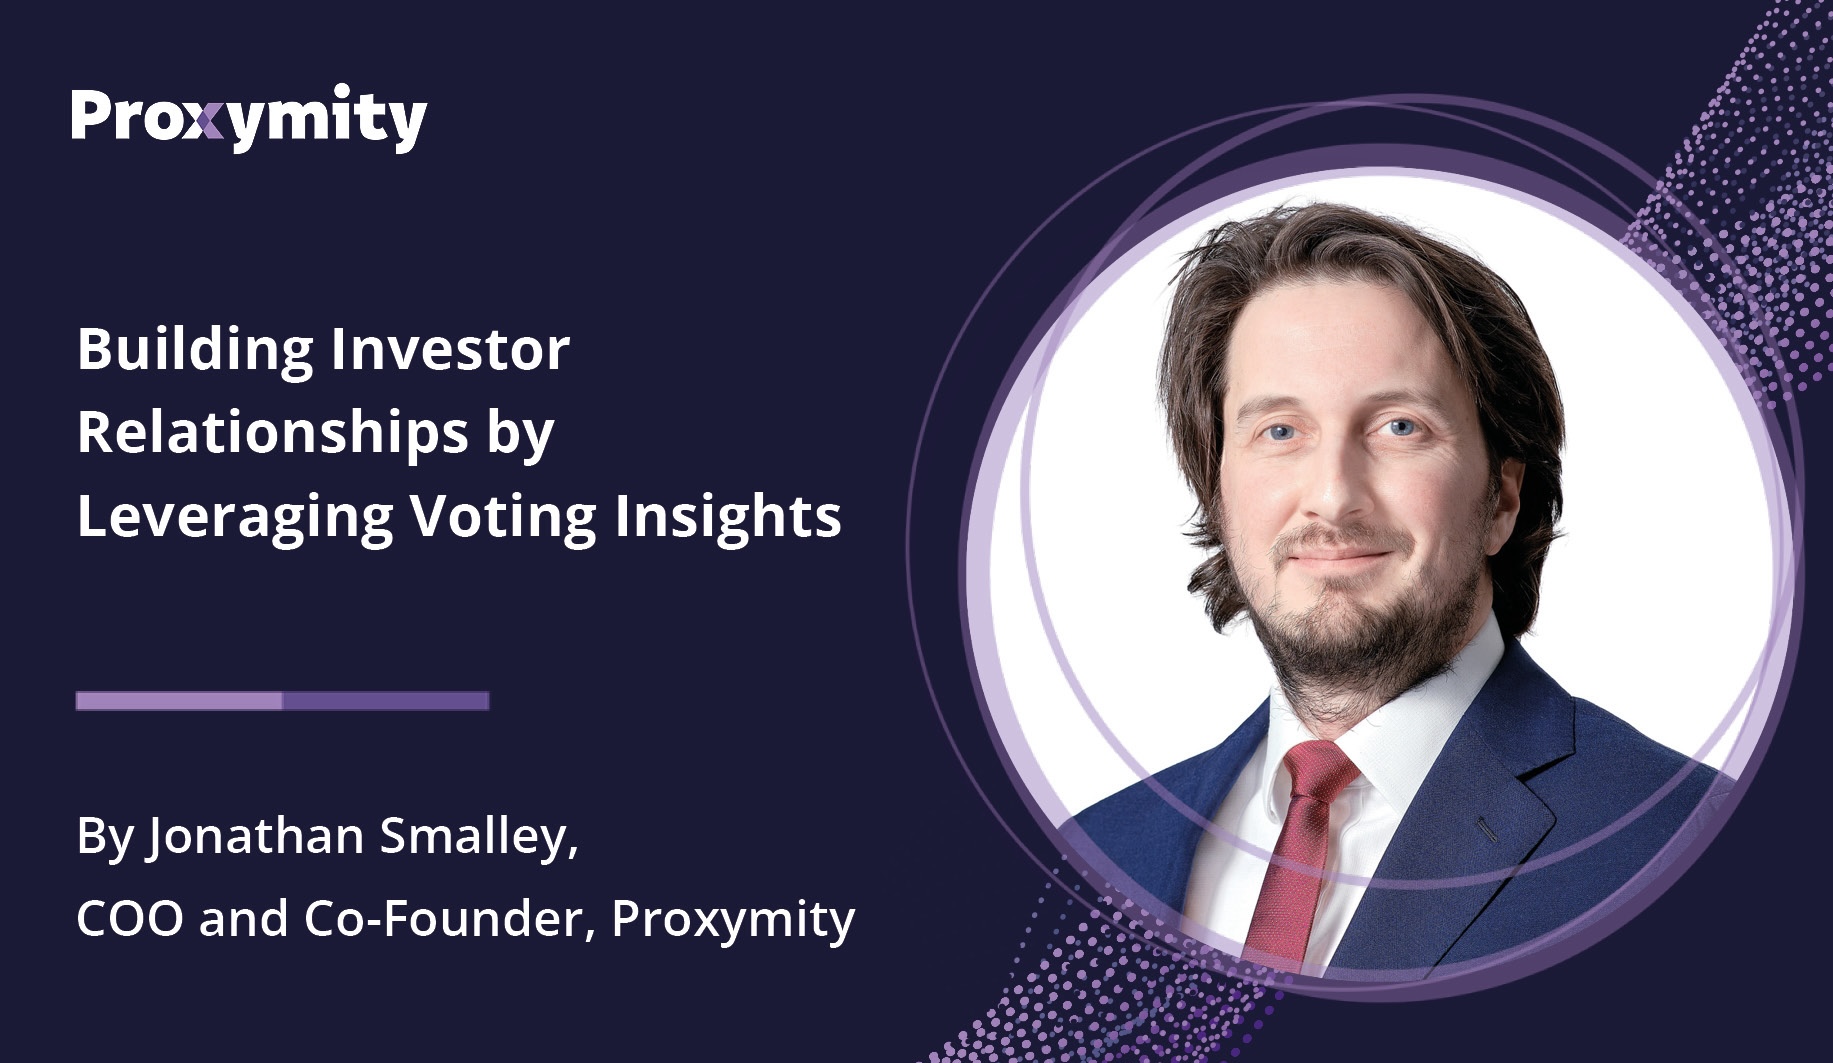 Building investor relationships by leveraging voting insights